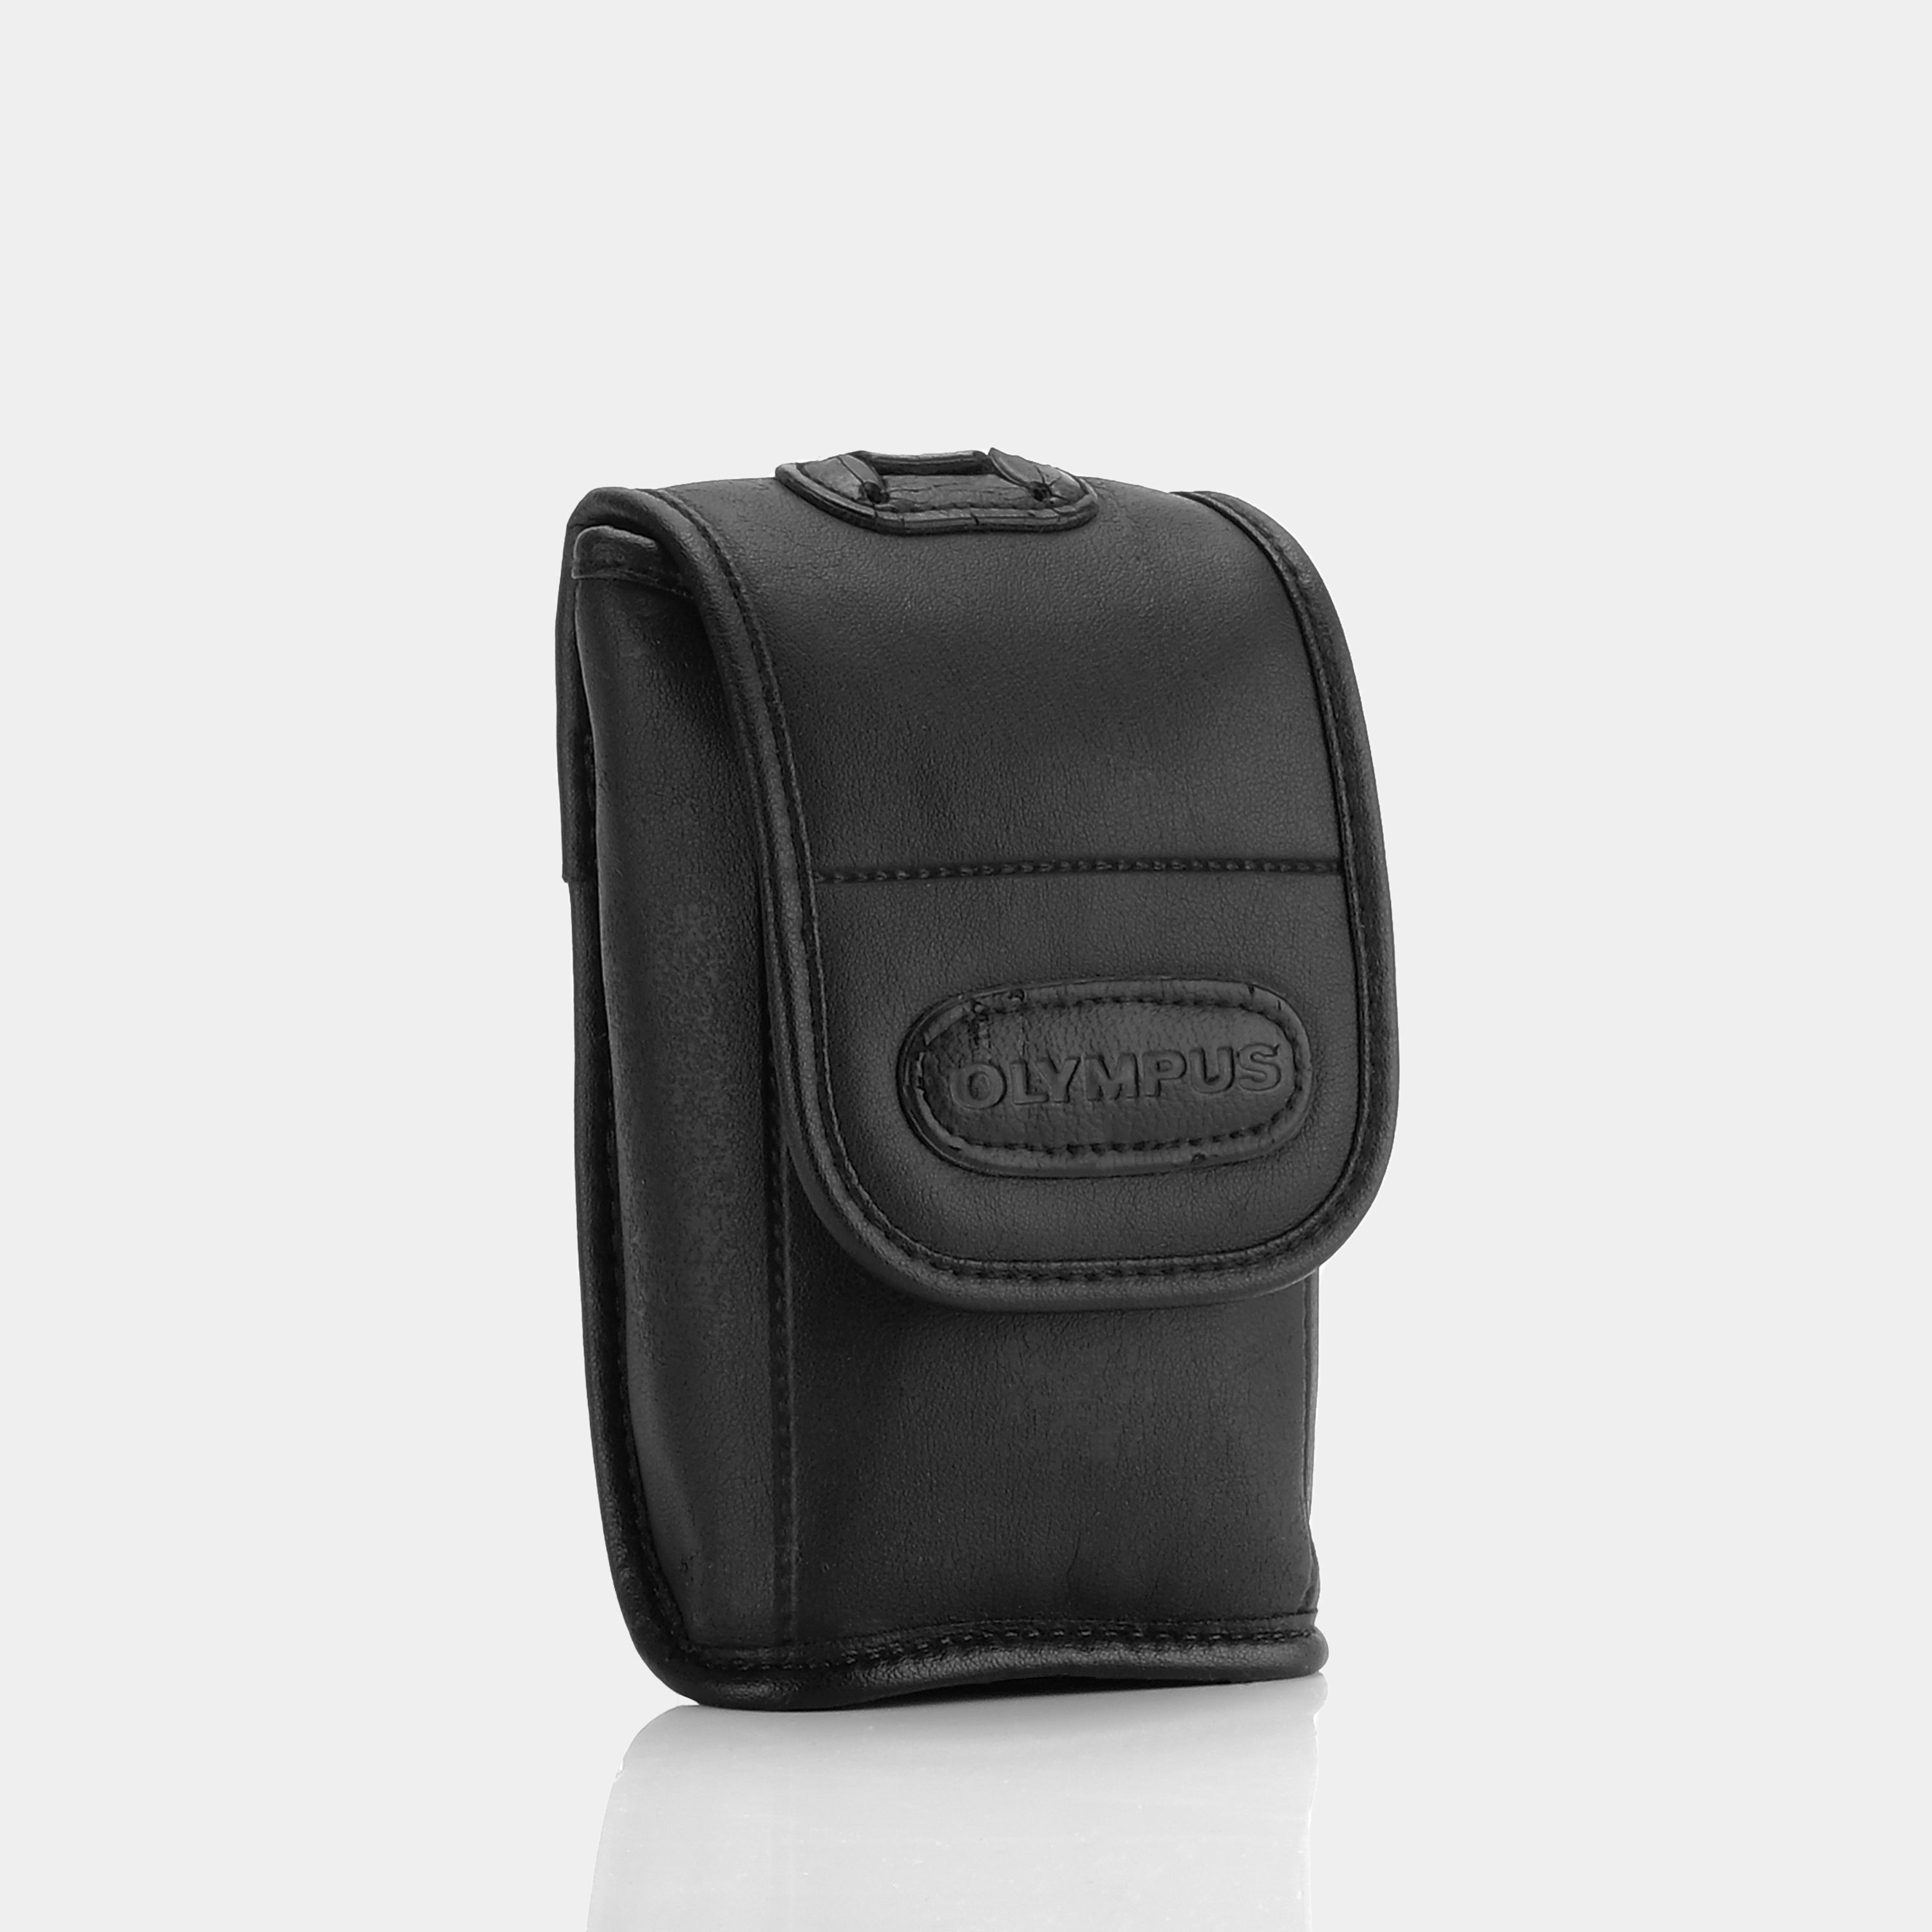 Olympus Black Faux Leather Camera Case